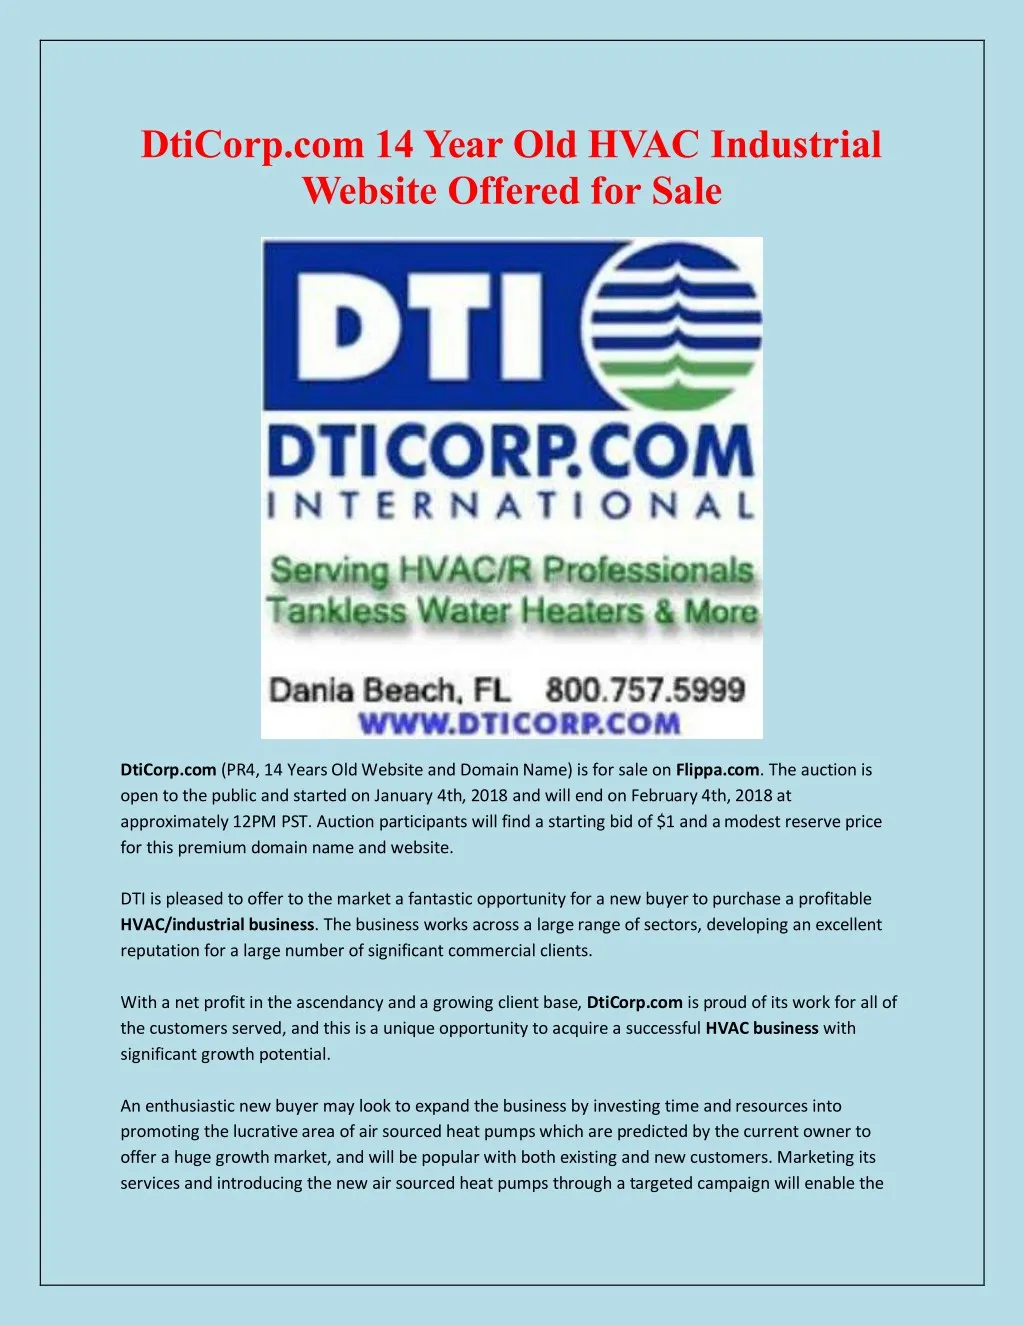 dticorp com 14 year old hvac industrial website